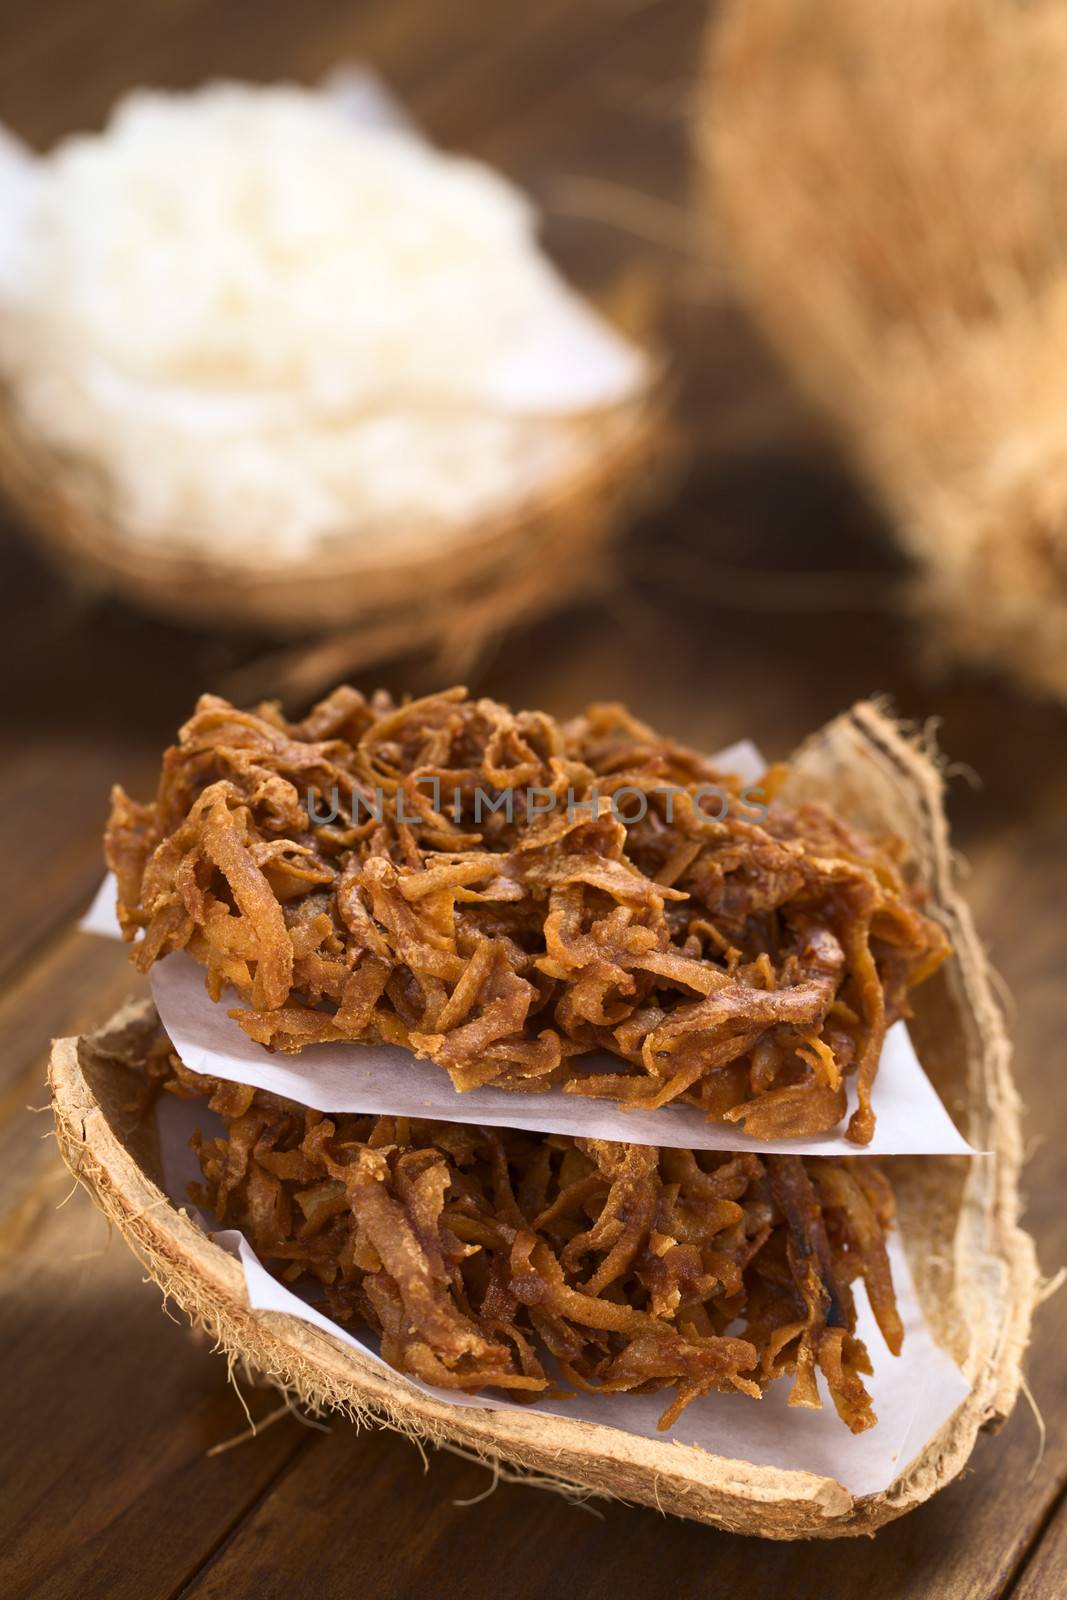 Peruvian cocadas, a traditional coconut dessert sold usually on the streets, made of grated coconut and white or brown sugar, which gives the different coloring of the sweet (Selective Focus, Focus on the front of the cocadas)